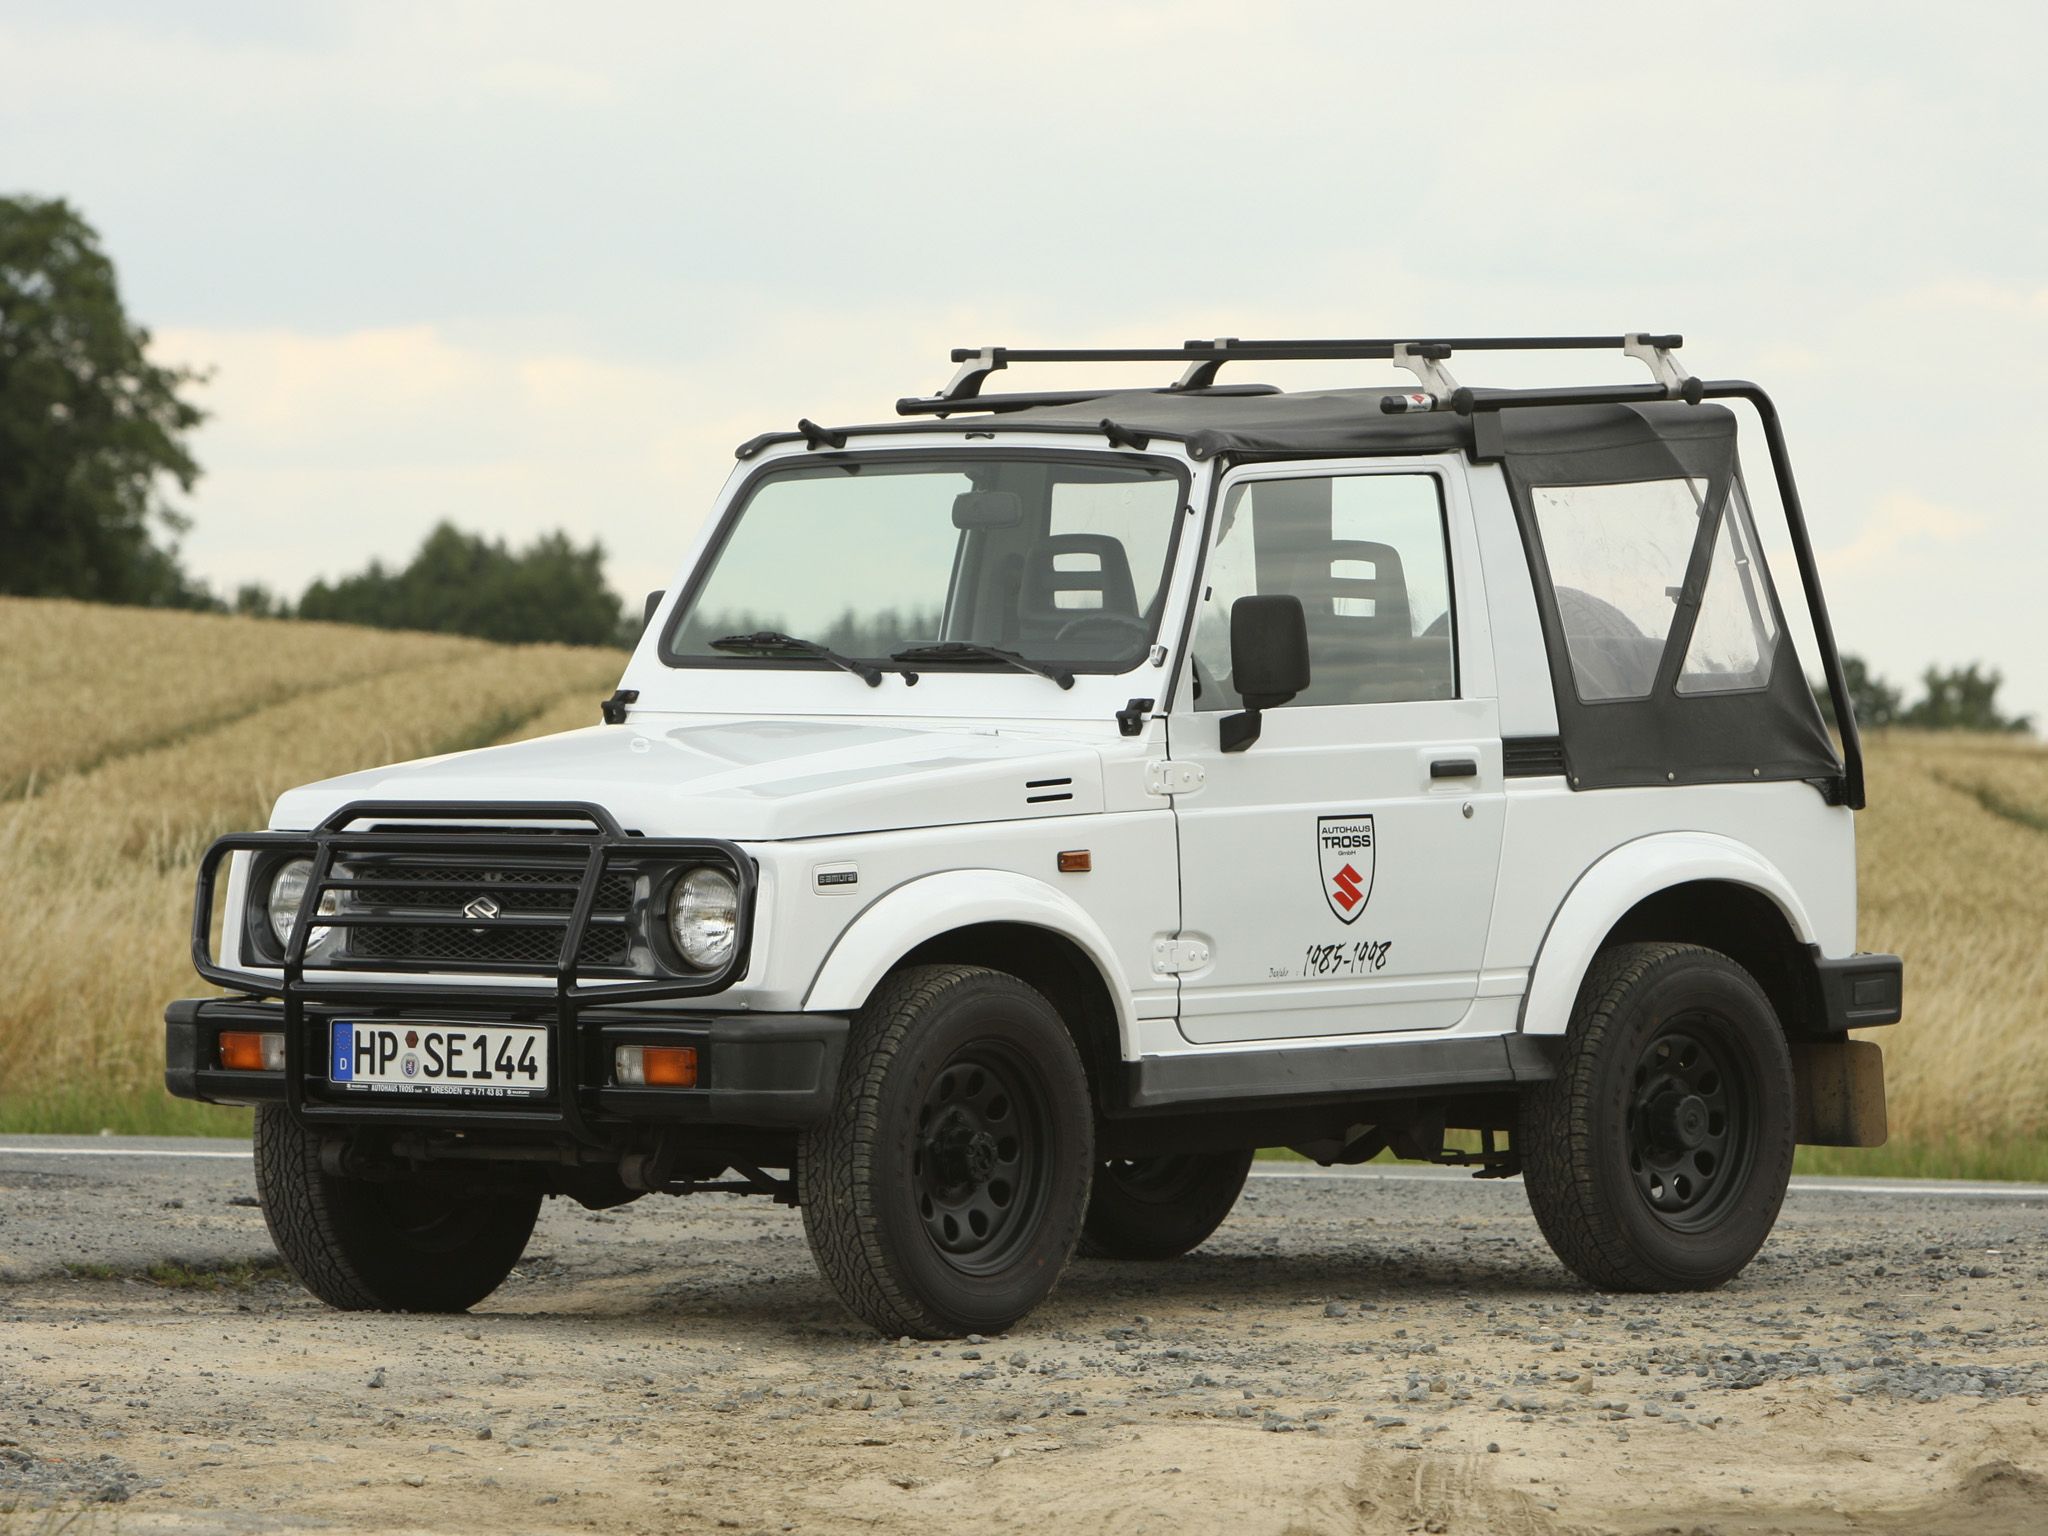 10 Things You Didn't Know About The Suzuki Samurai